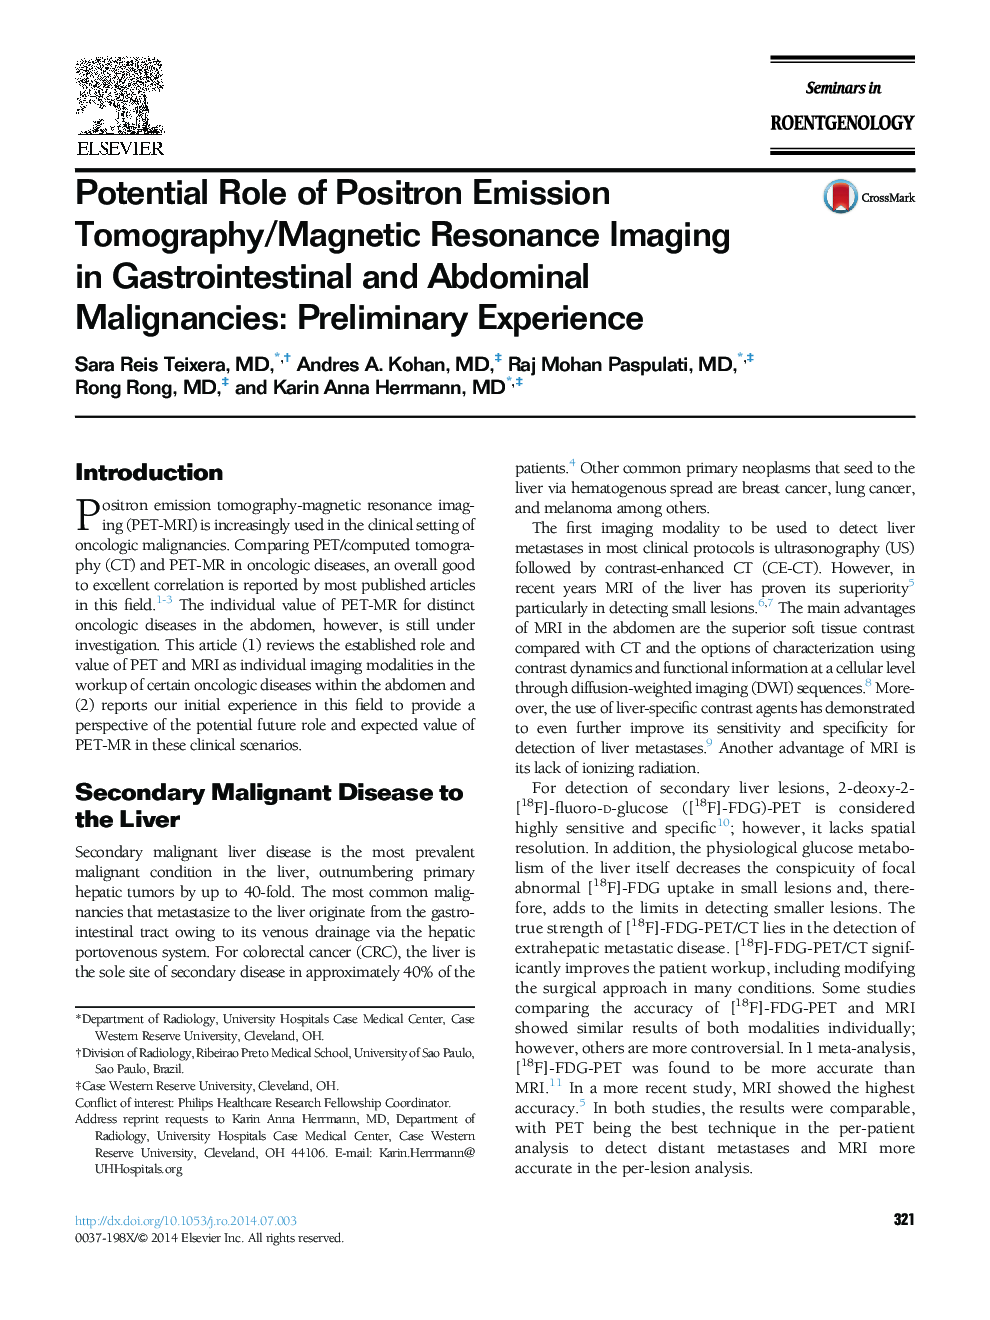 Potential Role of Positron Emission Tomography/Magnetic Resonance Imaging in Gastrointestinal and Abdominal Malignancies: Preliminary Experience